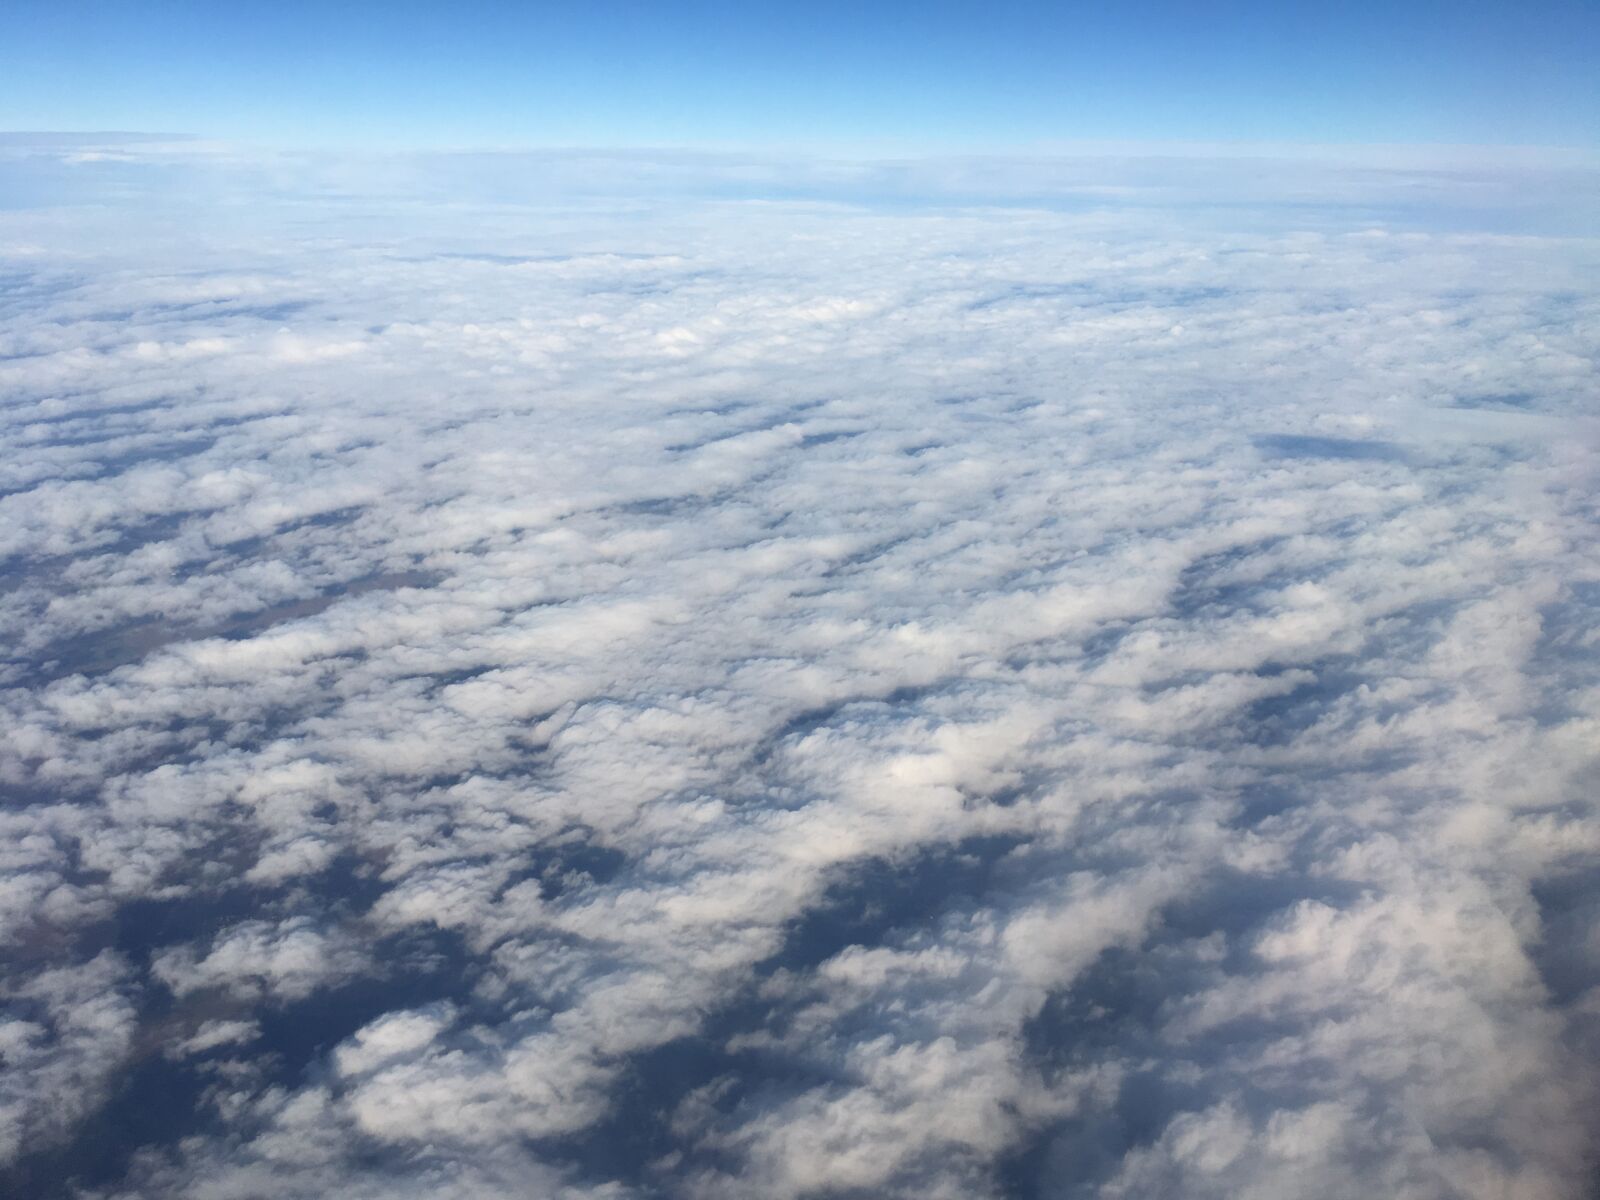 Apple iPhone 6s sample photo. Sky, clouds, airplane photography